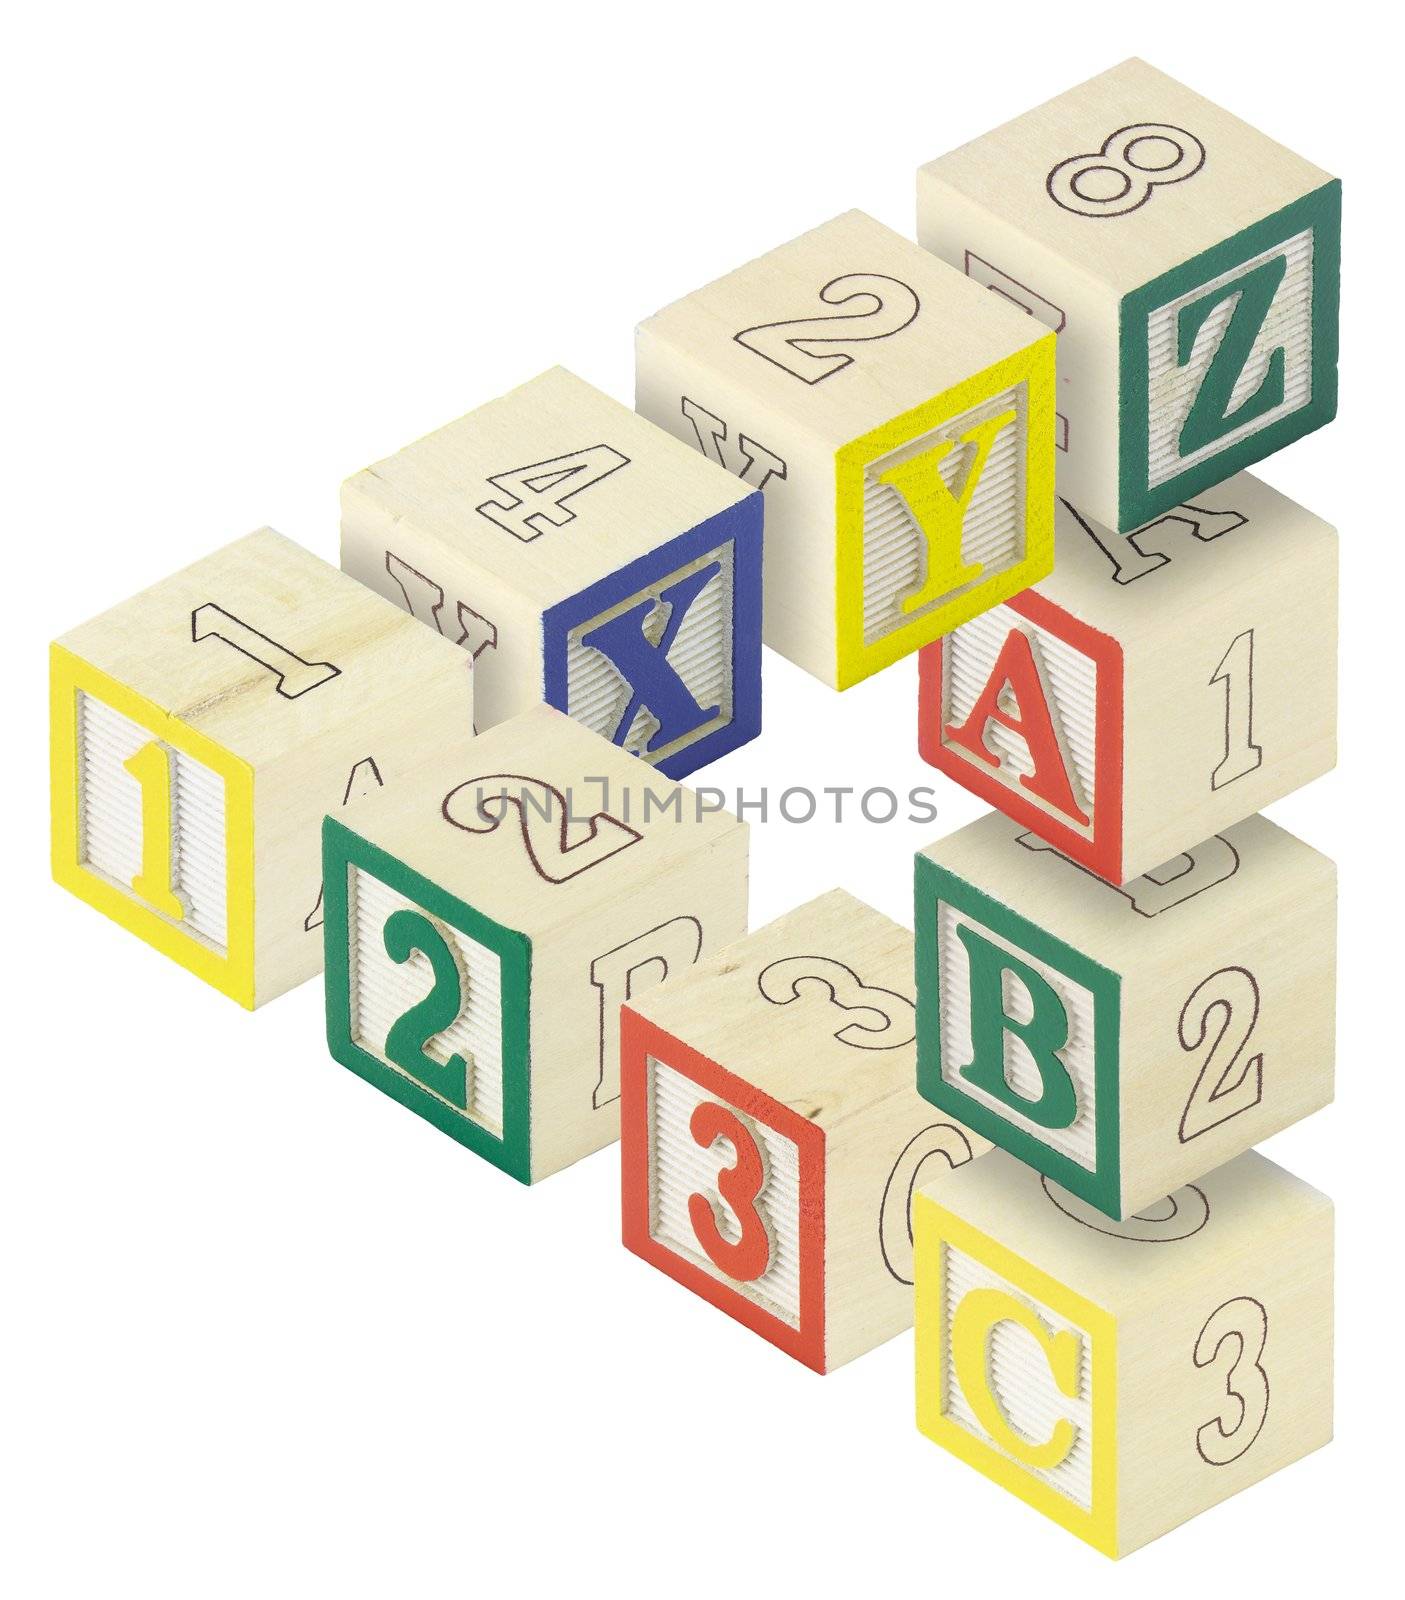 A penrose triangle created from alphabet blocks. Letters A,B,C, X,Y and Z and numbers 123 are featured.